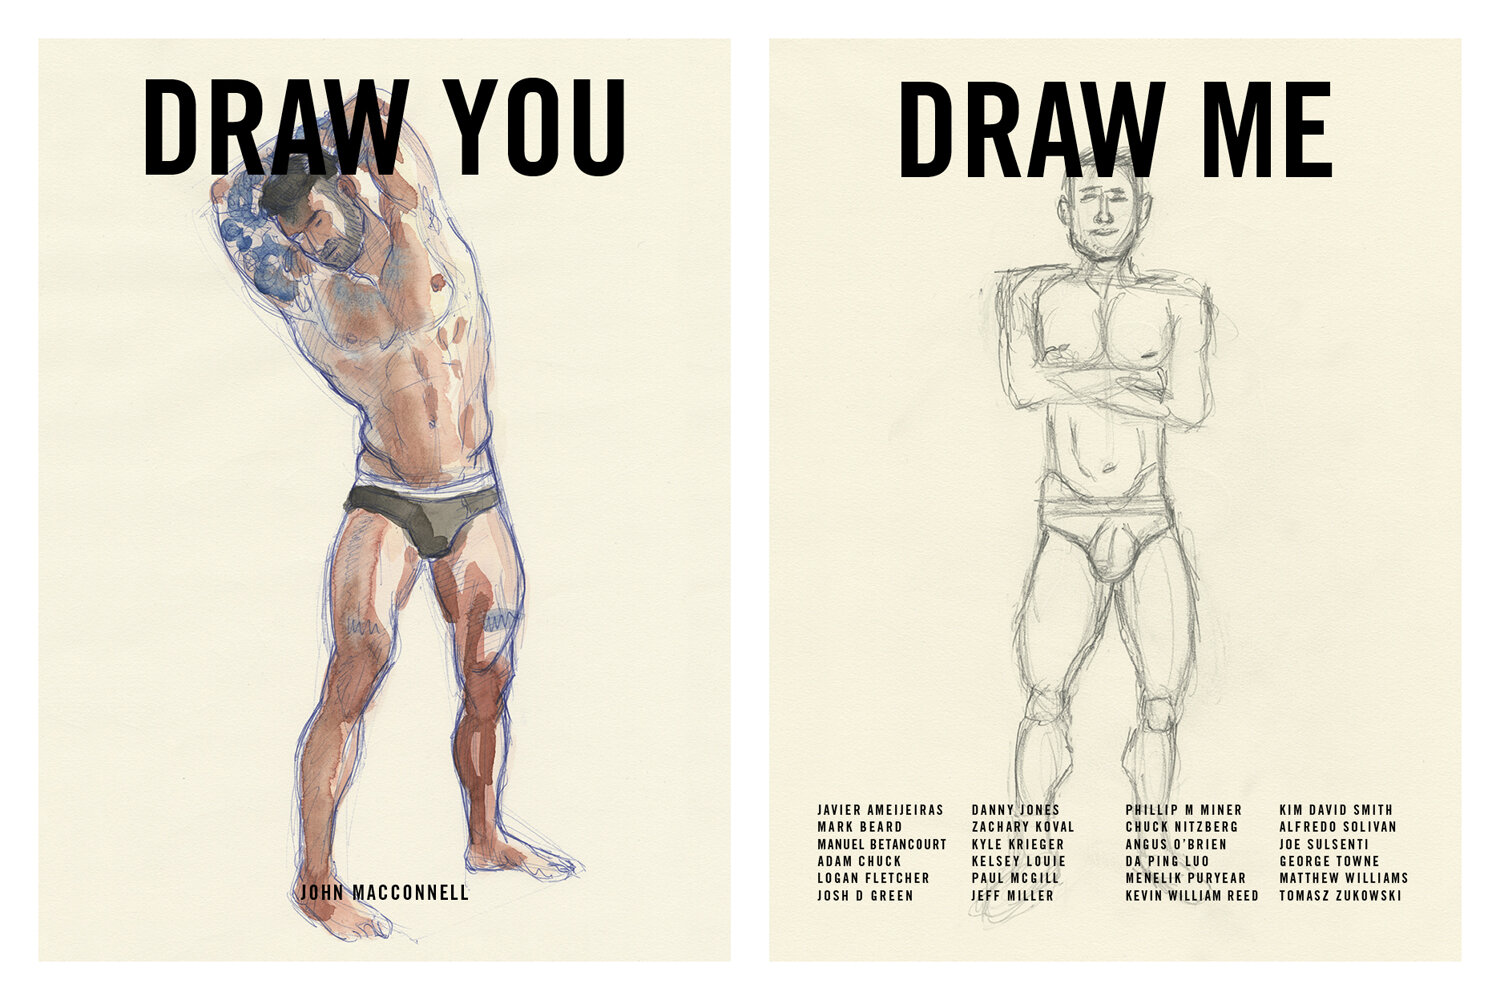   Draw You / Draw Me  is a project between friends. I invited 24 friends to sit for a portrait, and asked them to do a portrait of me.  Buy the book  